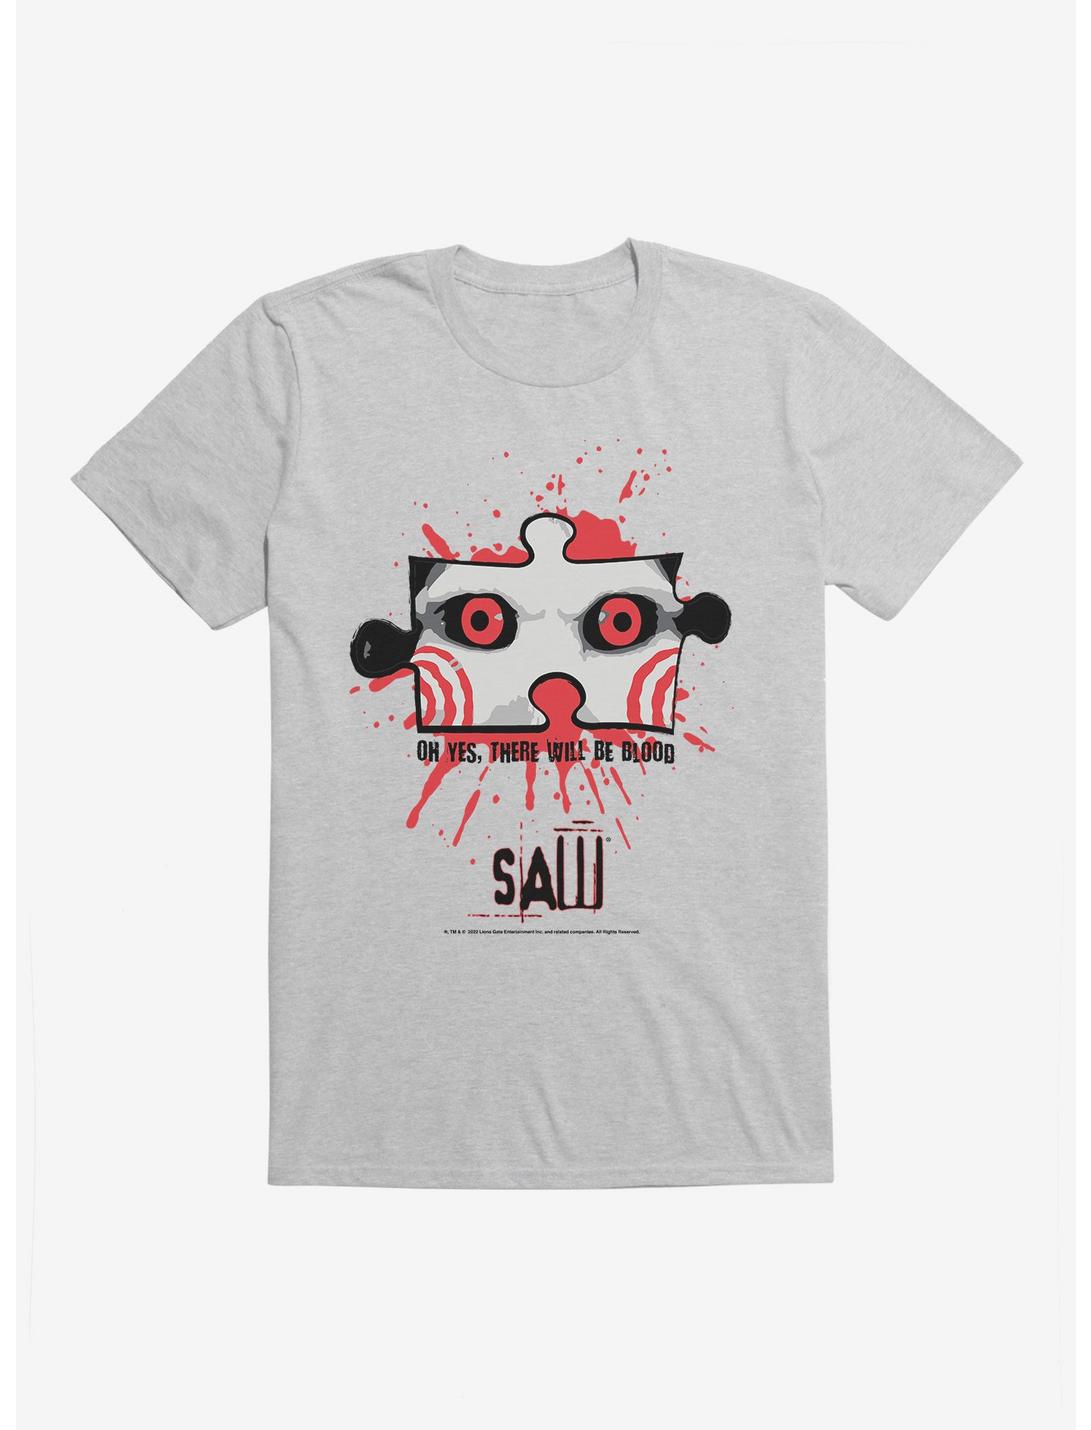 Saw There Will Be Blood T-Shirt, , hi-res